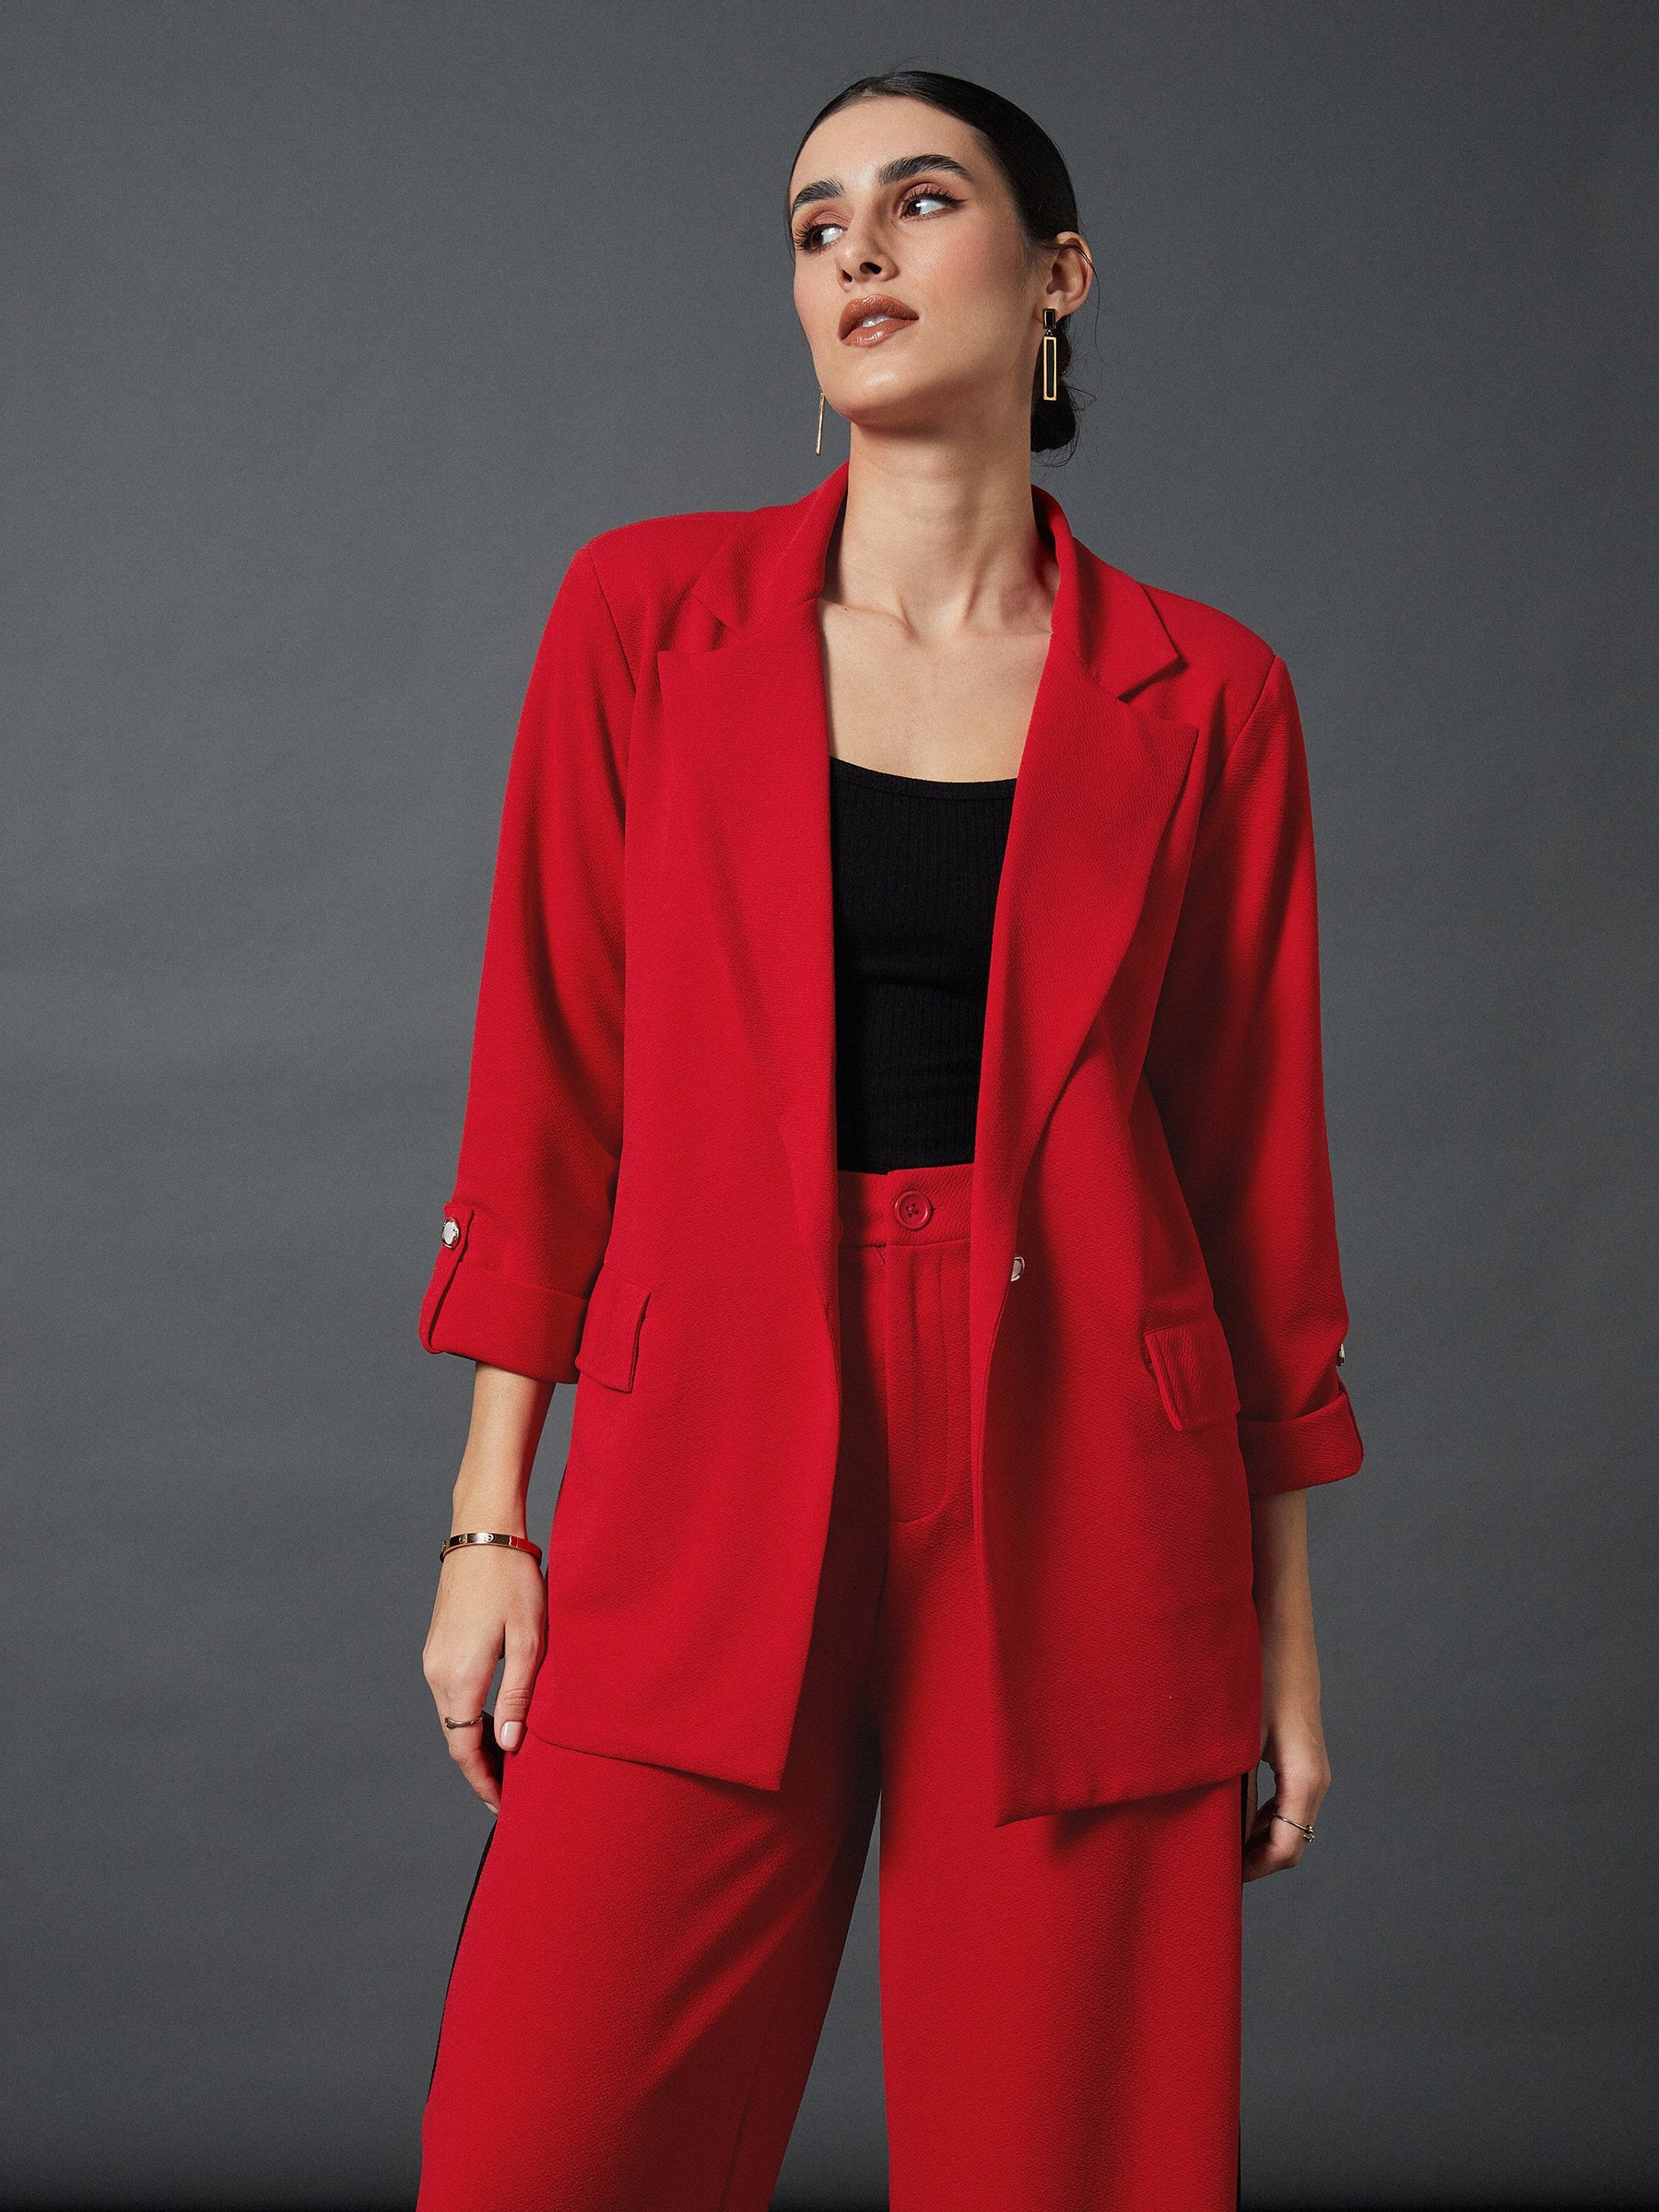 Unique21 Petite 3 piece blazer, shorts and pants set in red | ASOS